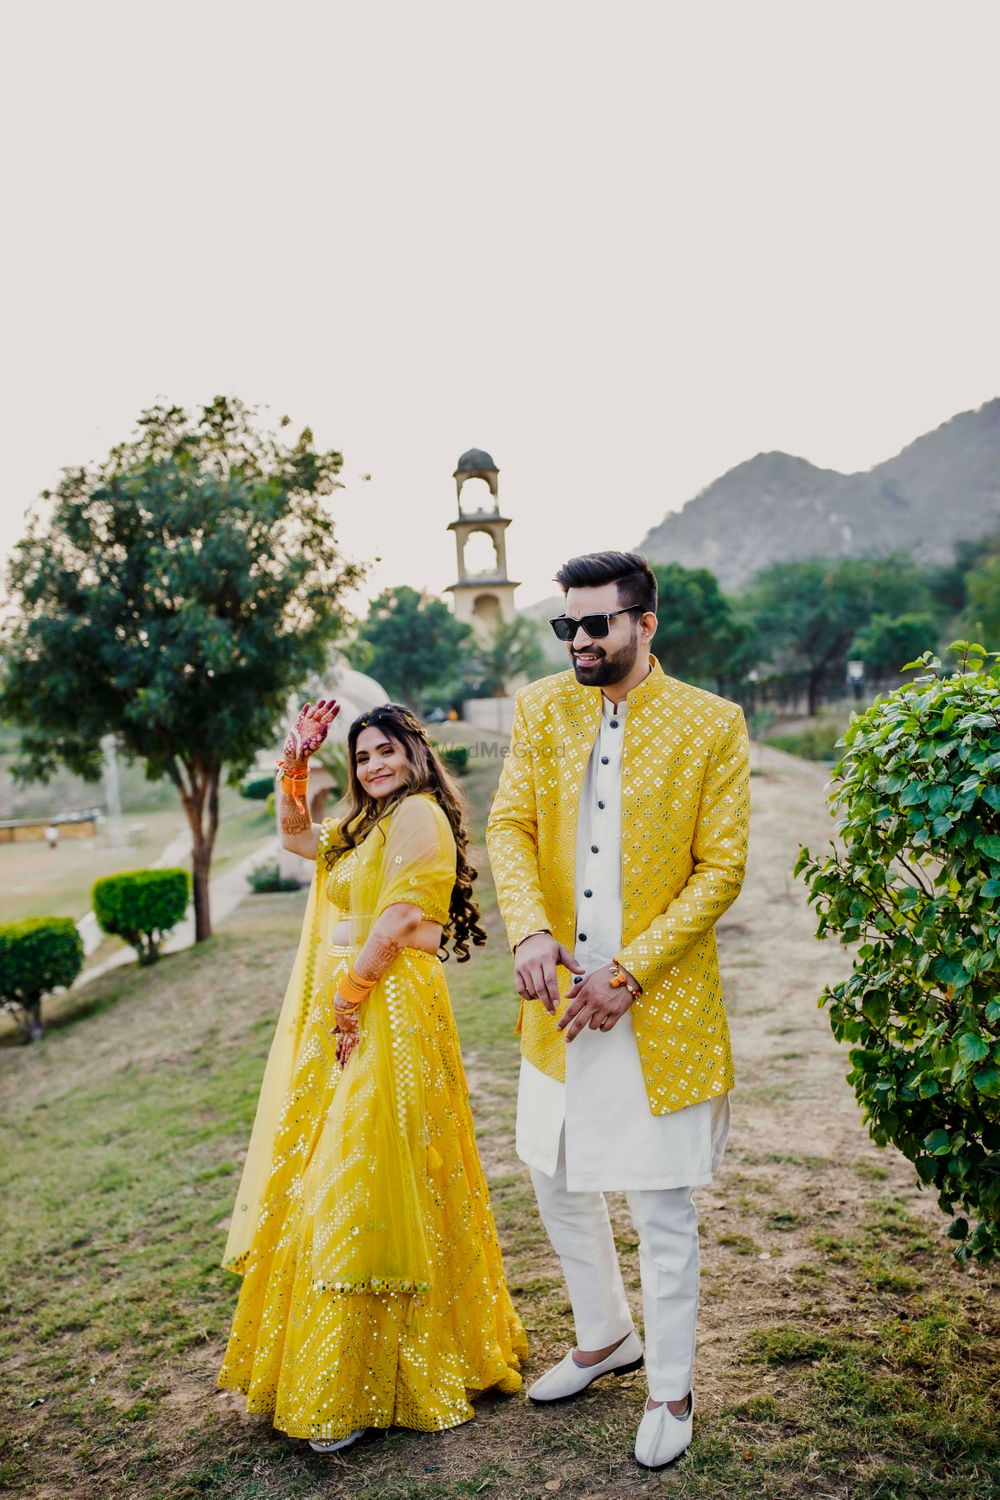 Photo From Sanmeet & Ashwin - By Picture Visual